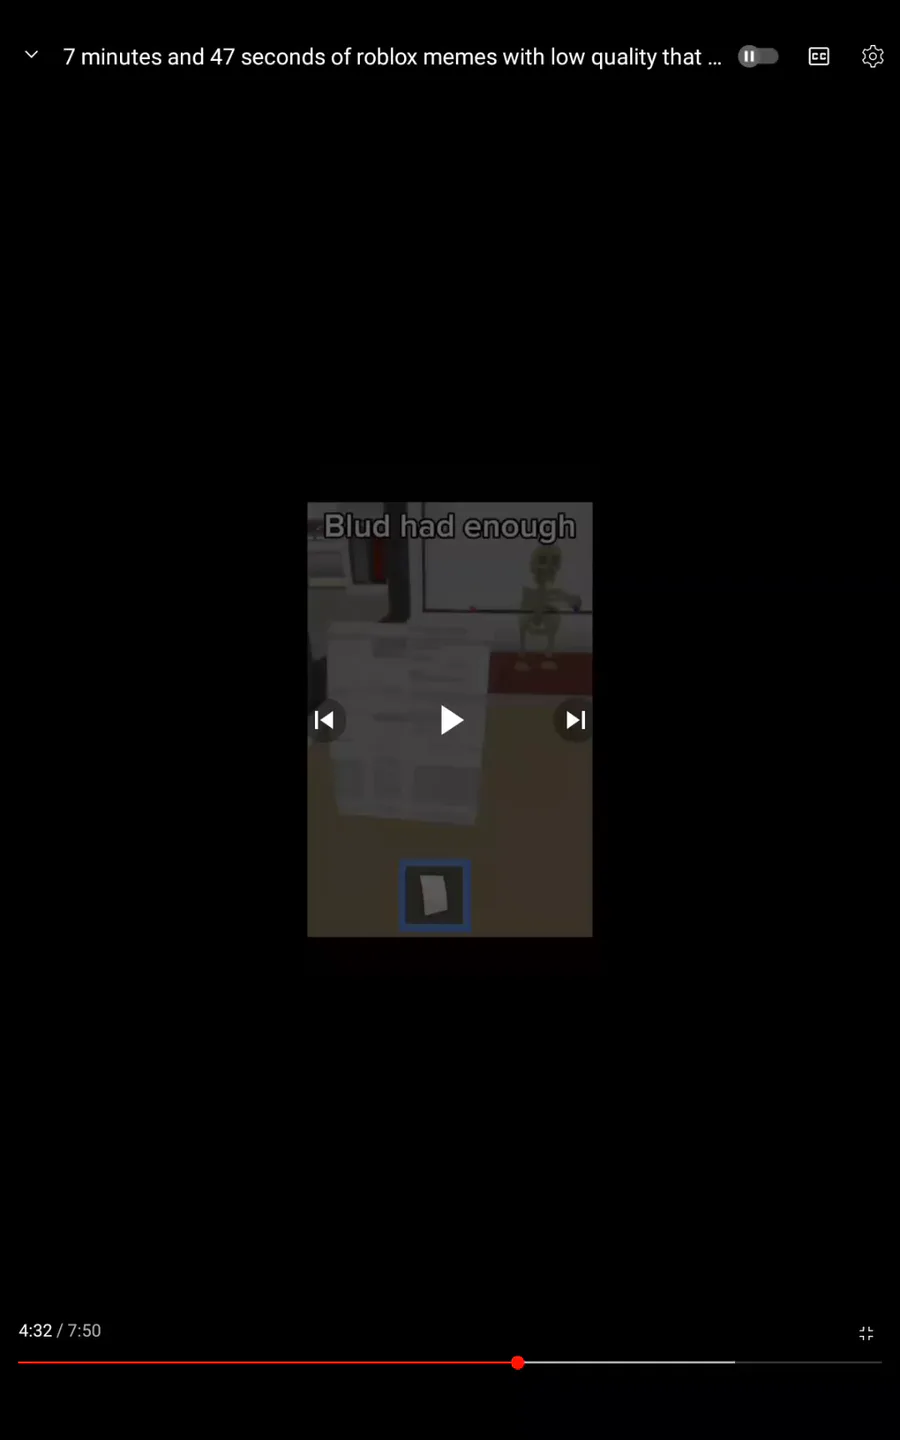 6 minutes and 11 seconds of roblox memes with low quality that